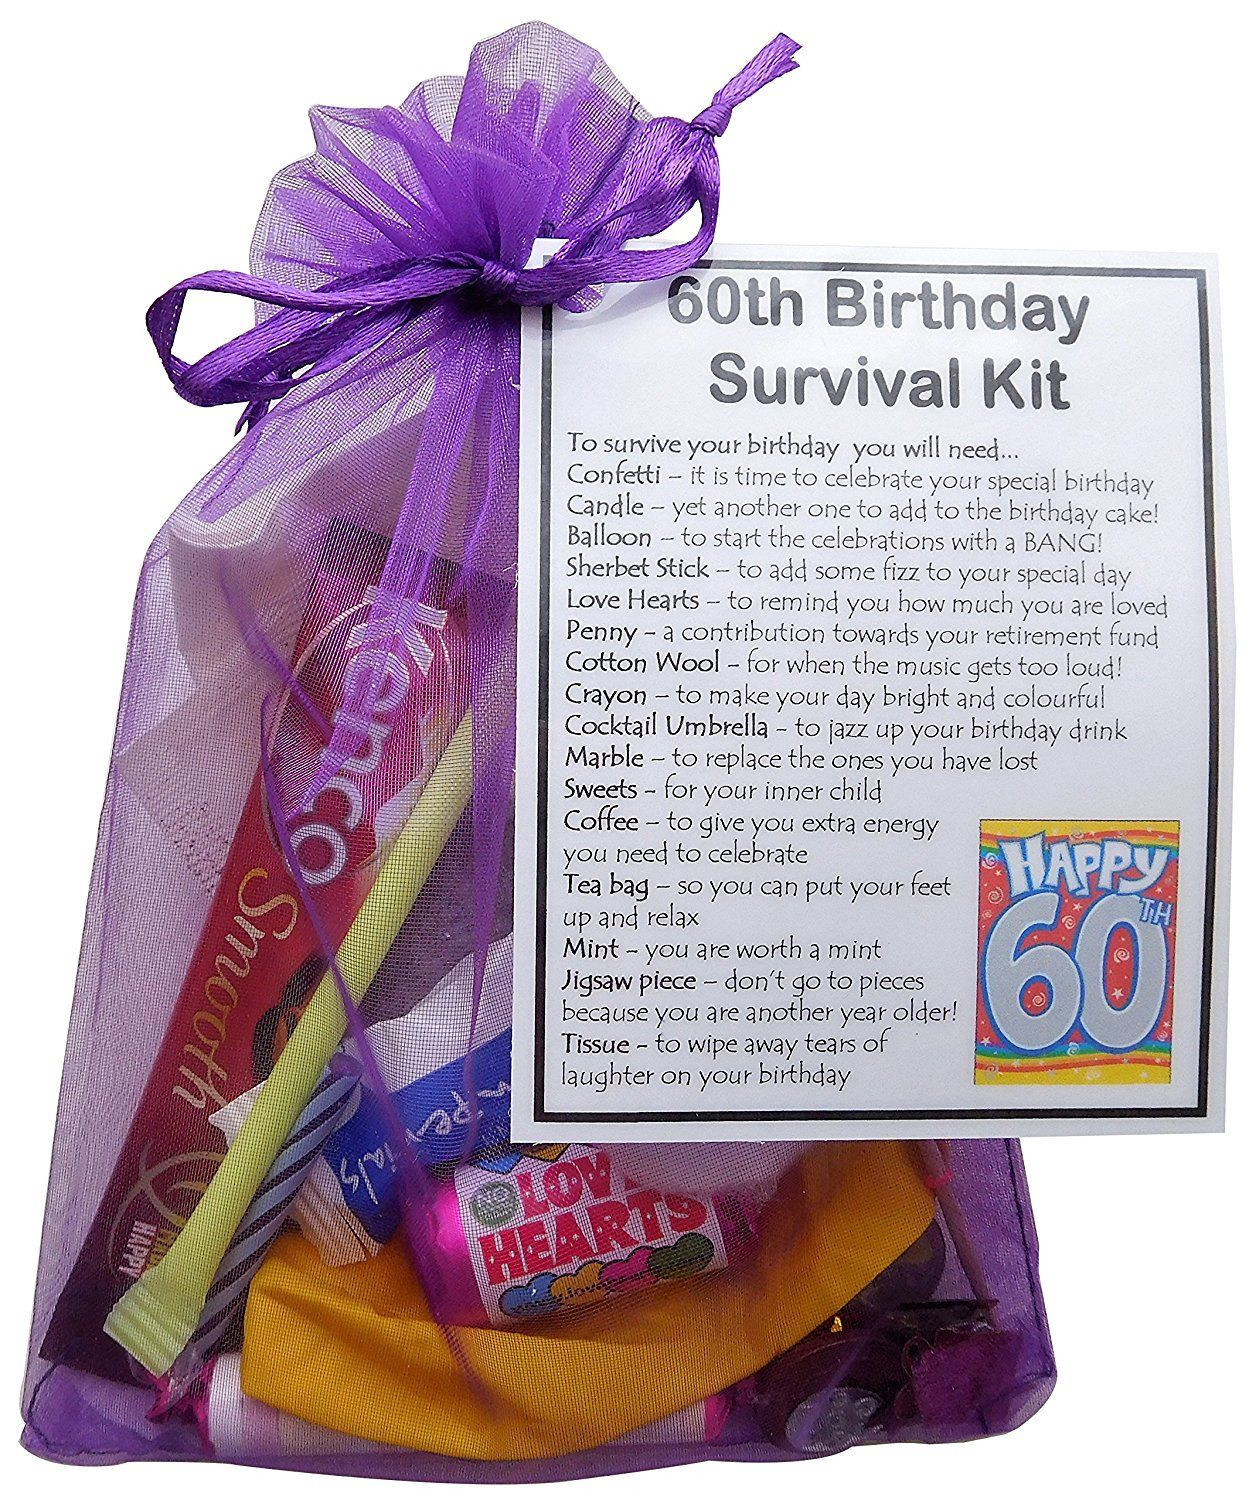 Gift Ideas For 60th Birthday
 60th Birthday Gift Unique Novelty survival kit 60th